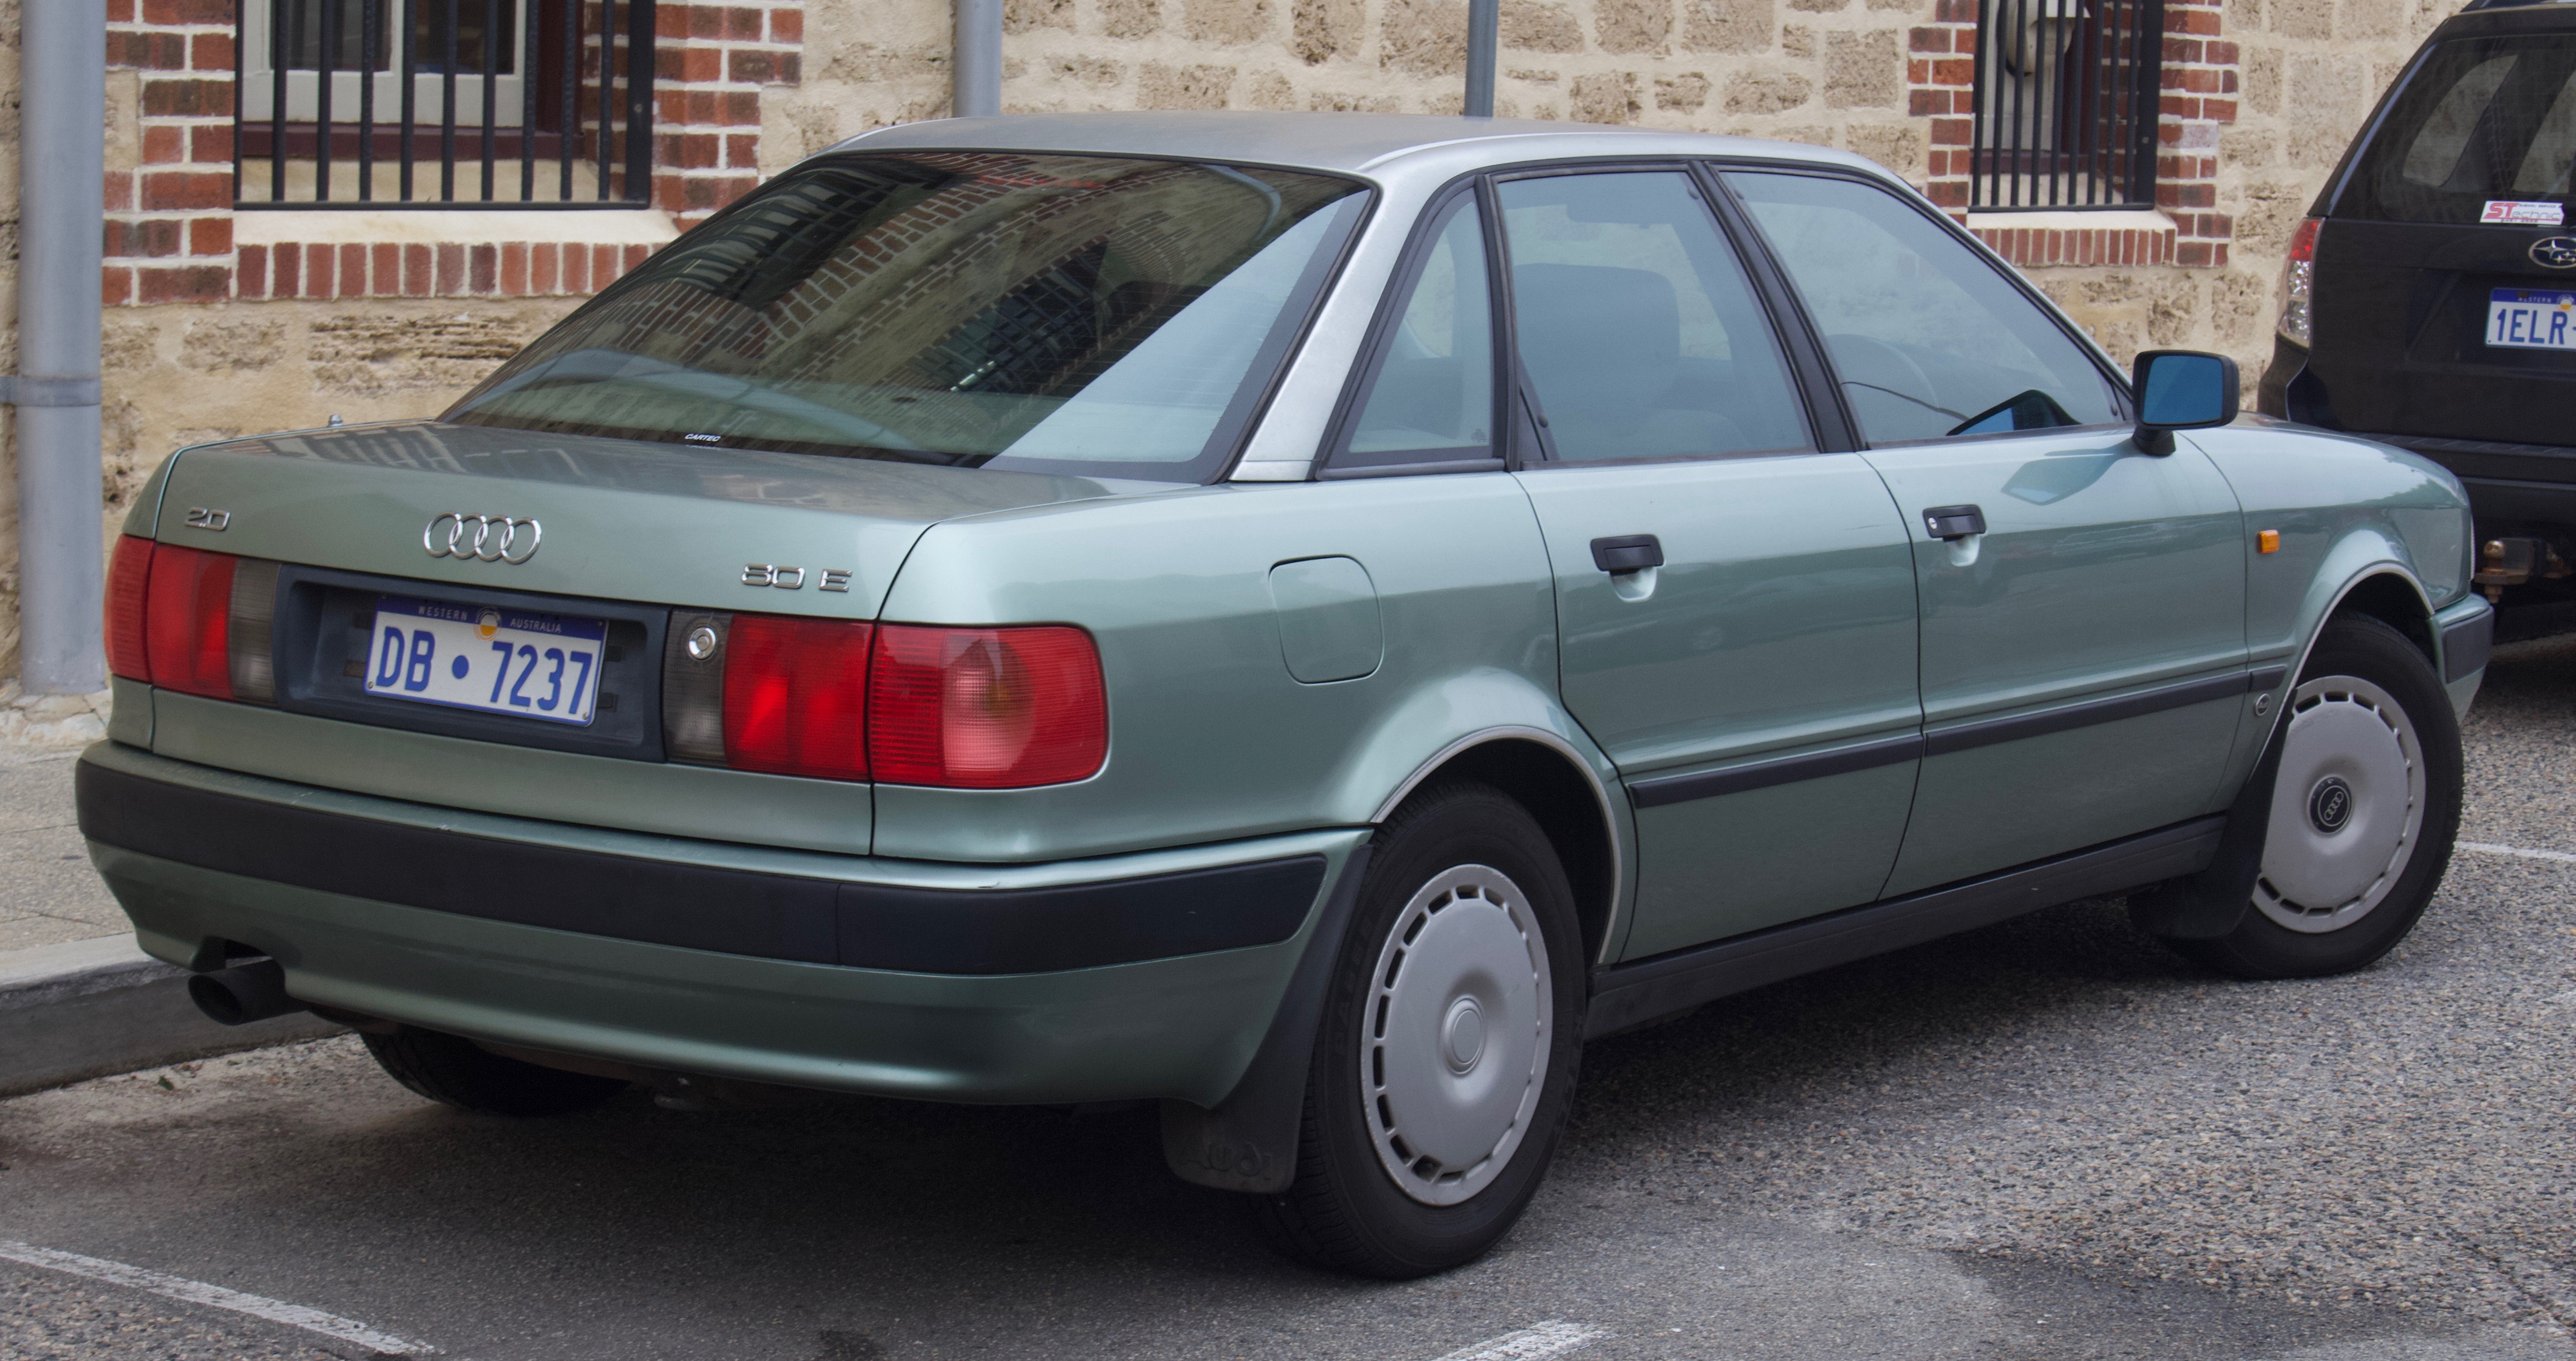 Audi 80: Most Up-to-Date Encyclopedia, News & Reviews